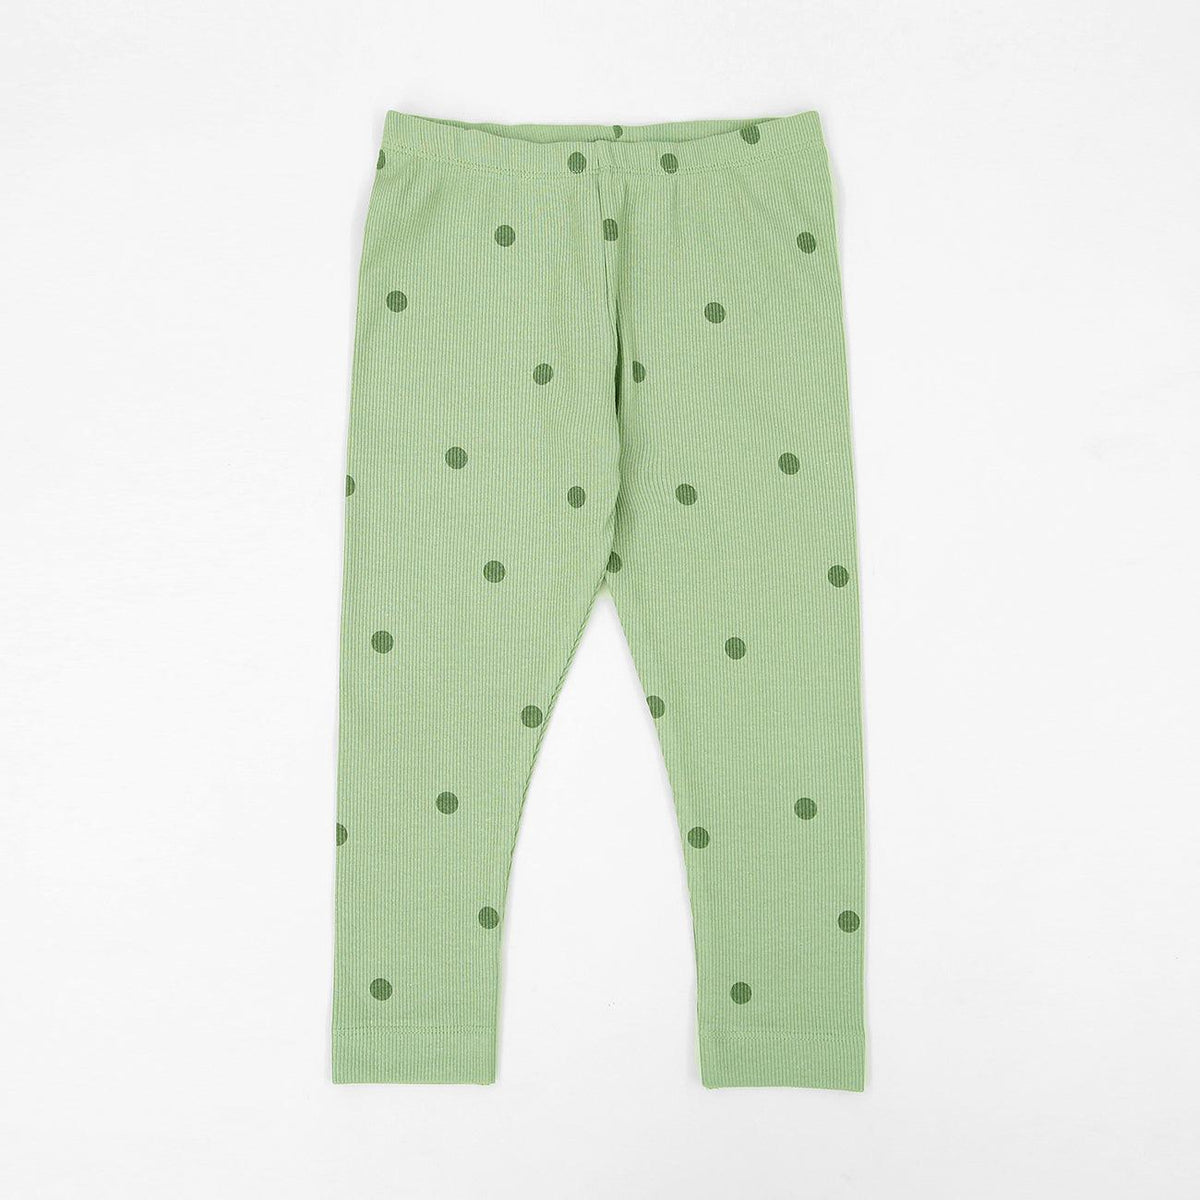 Imported All-Over Printed Soft Cotton Rib Legging For Girls 1-2 MONTH - 4 YRS (LE-11573) - Brands River